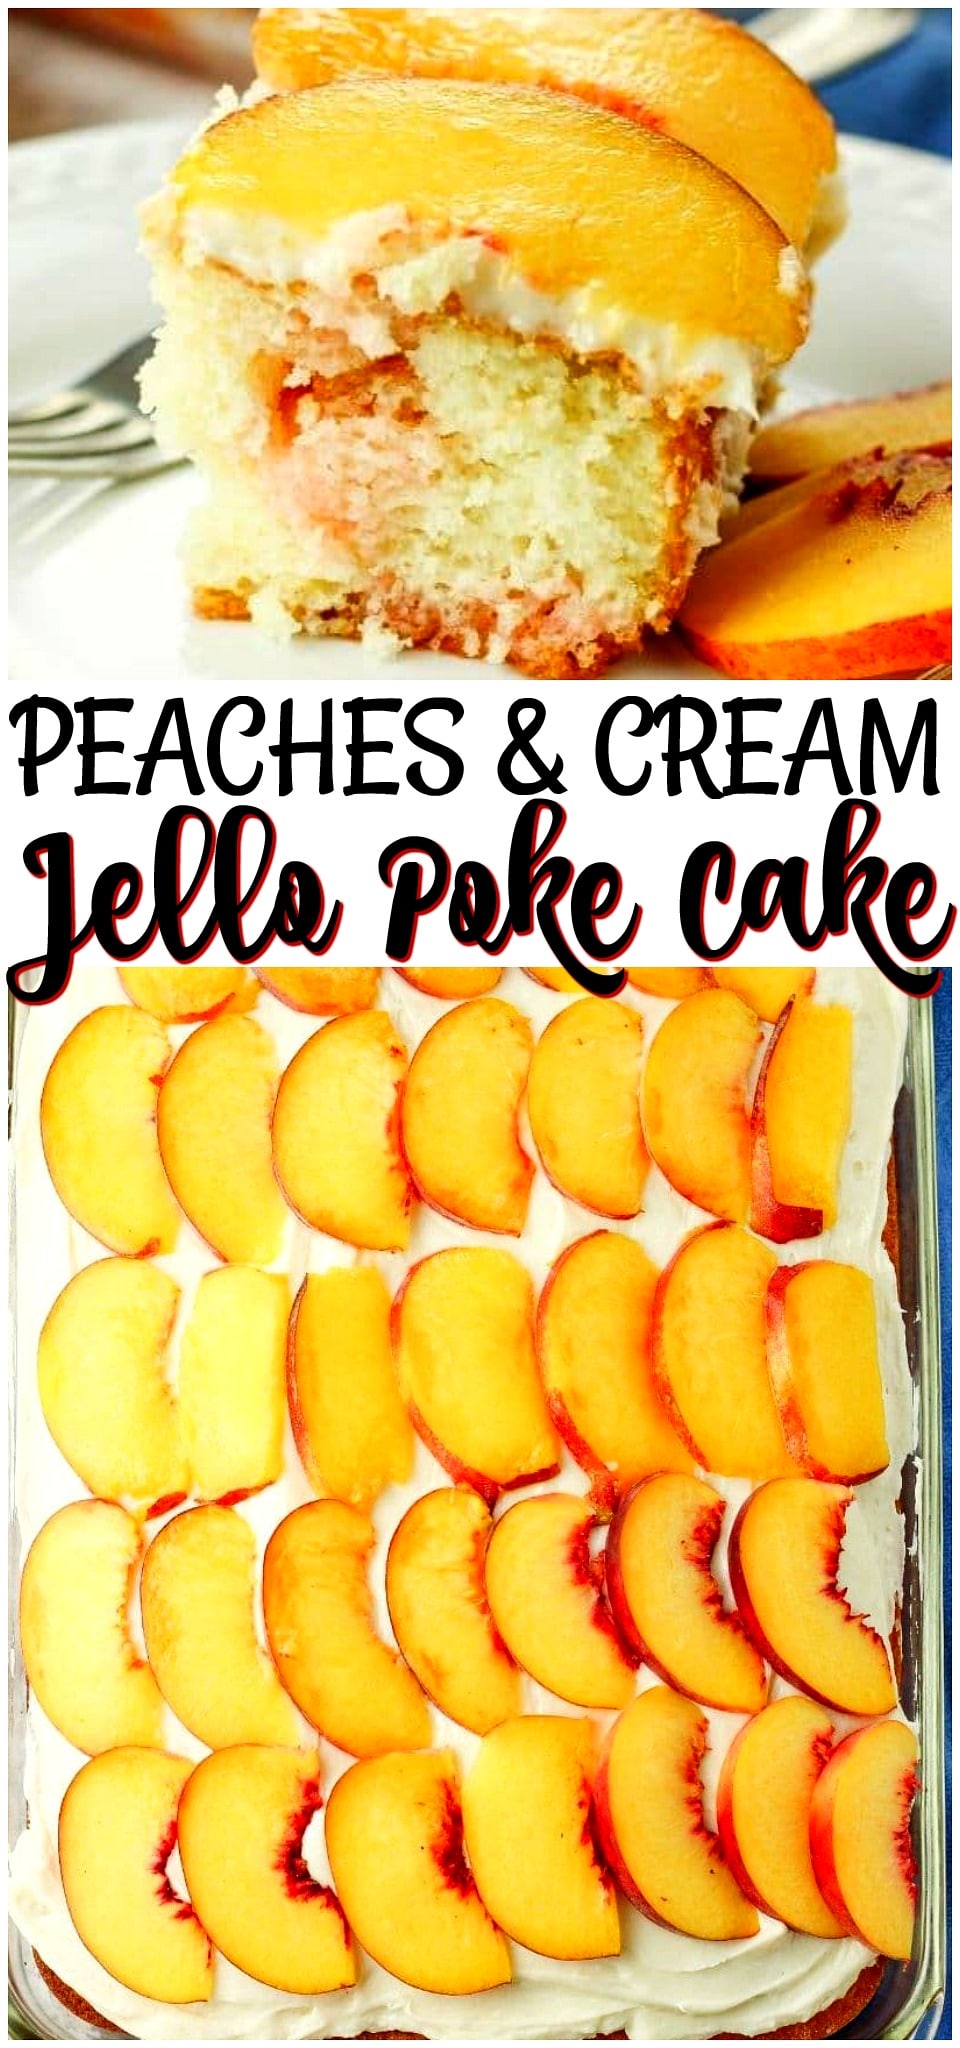 Peaches and Cream Poke Cake filled with sweet peach flavor & topped with cream cheese frosting and fresh peaches. Easy jello poke cake recipe for peach lovers! 